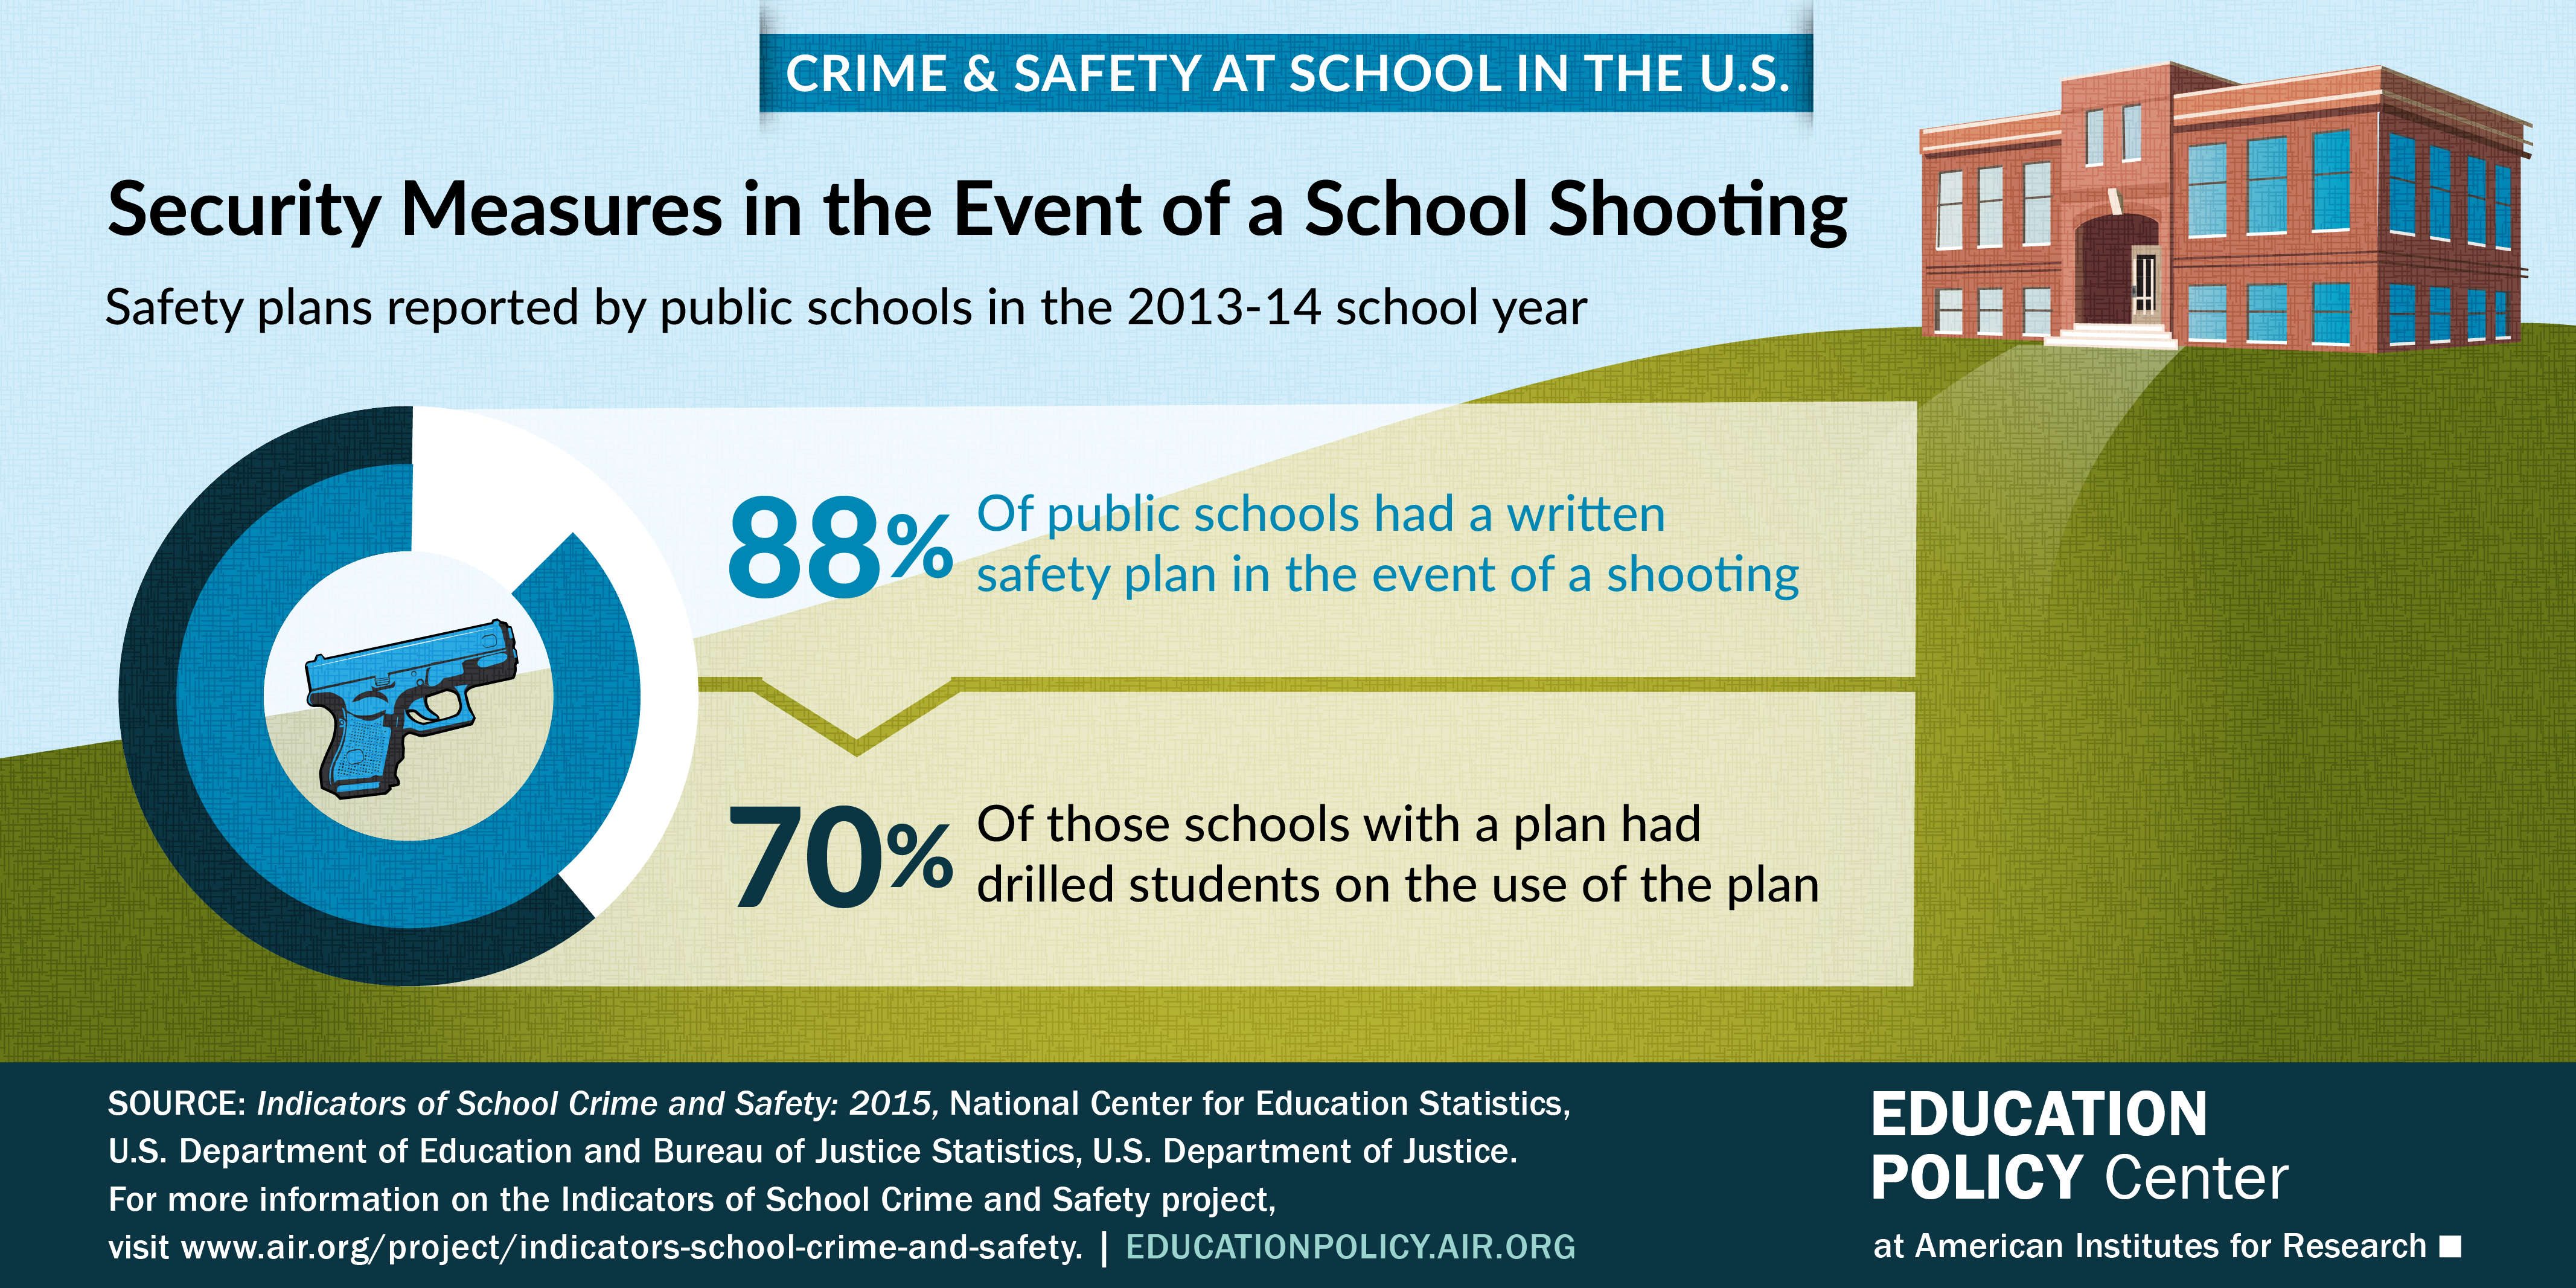 Infographic on security measures in the event of a school shooting reported by public schools in the 2013-14 school year